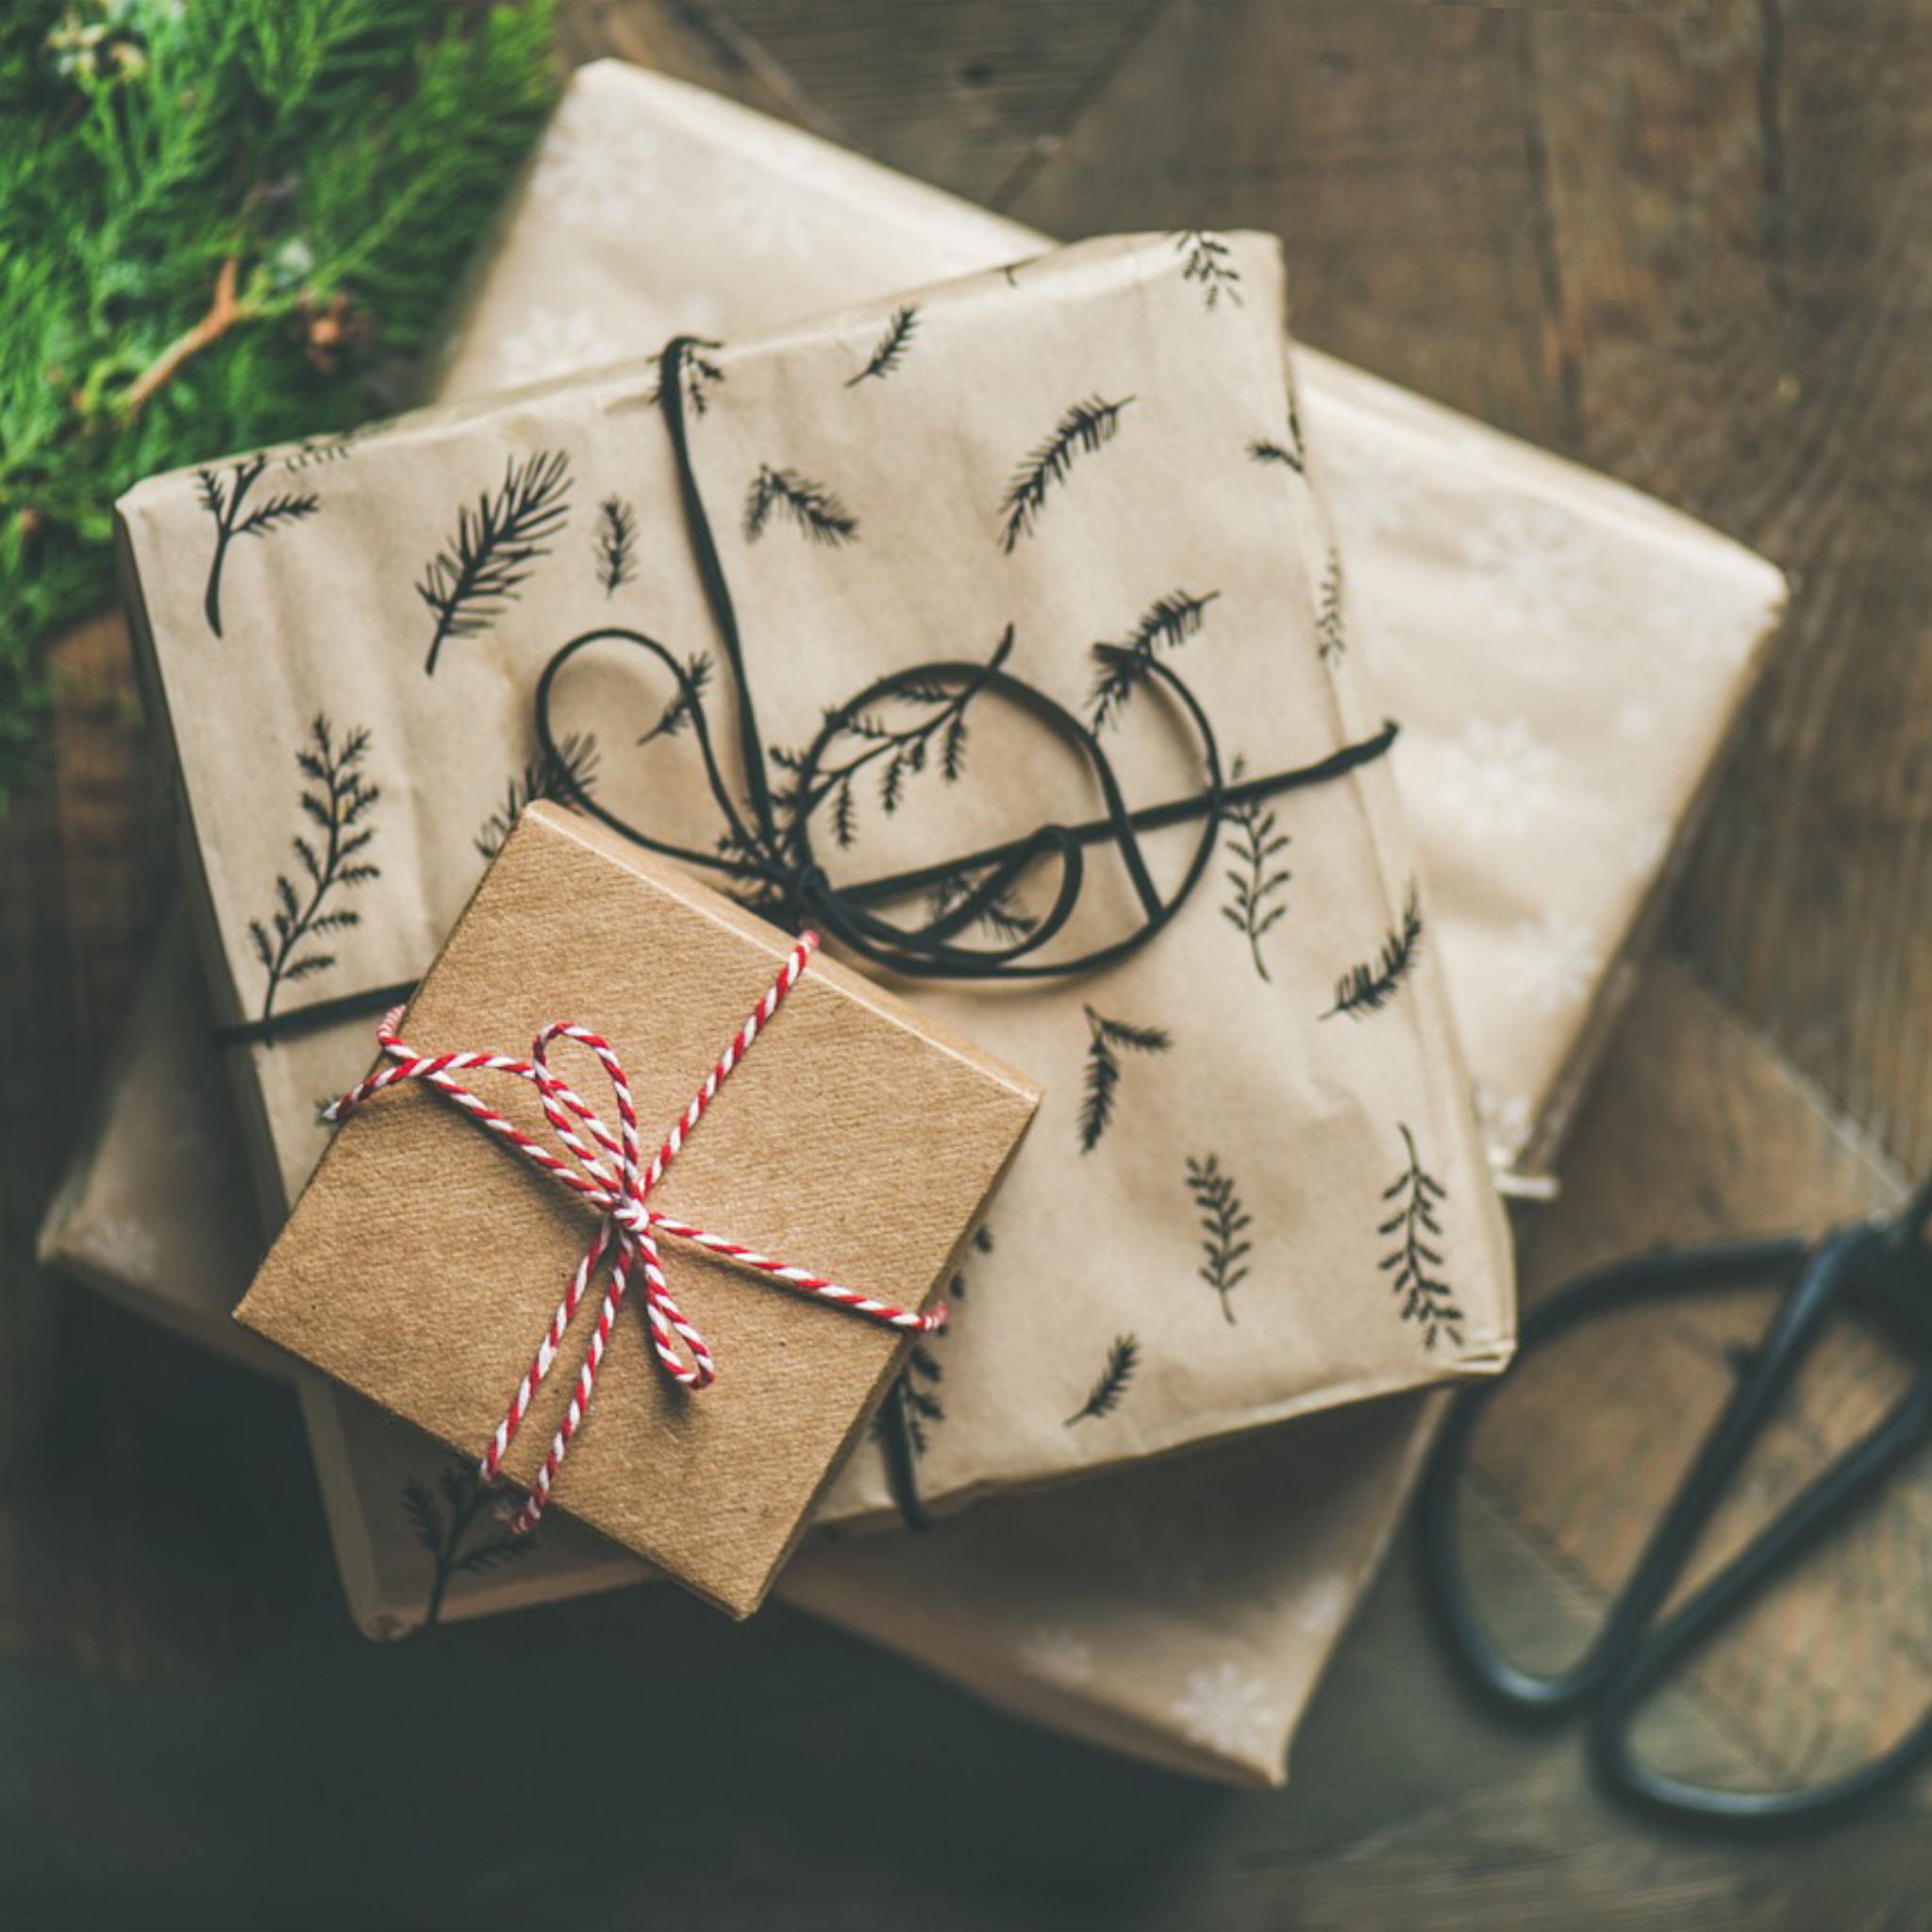 Our 2022 Plastic-Free Holiday Gift Guide is here!